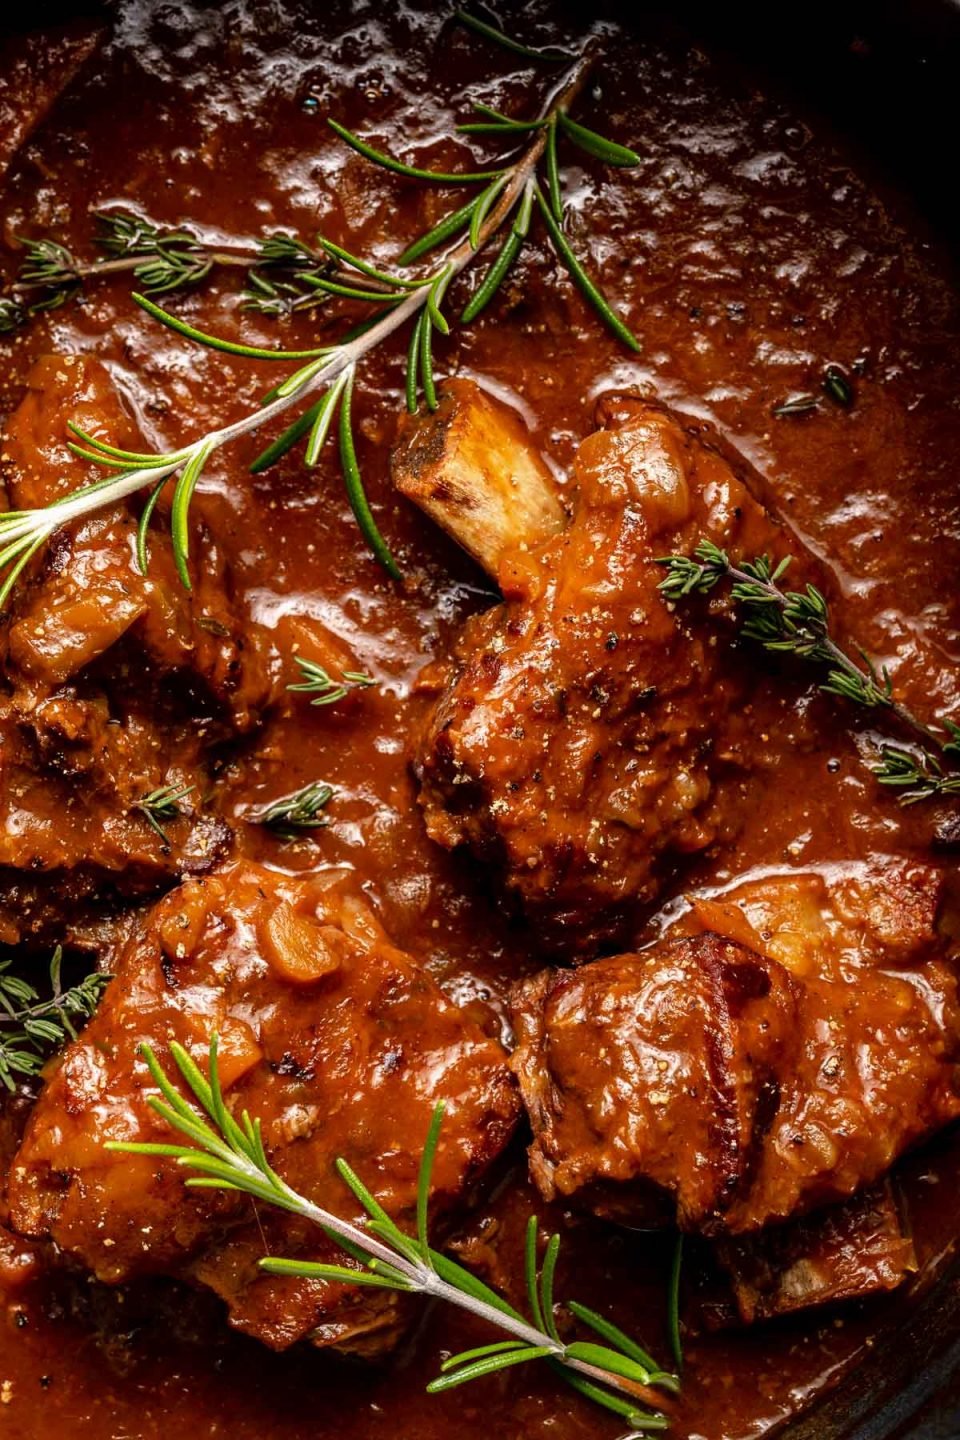 A close up of braised beef short ribs in a red wine braising sauce. The finished short ribs have been garnished with sprigs of fresh thyme and fresh rosemary.